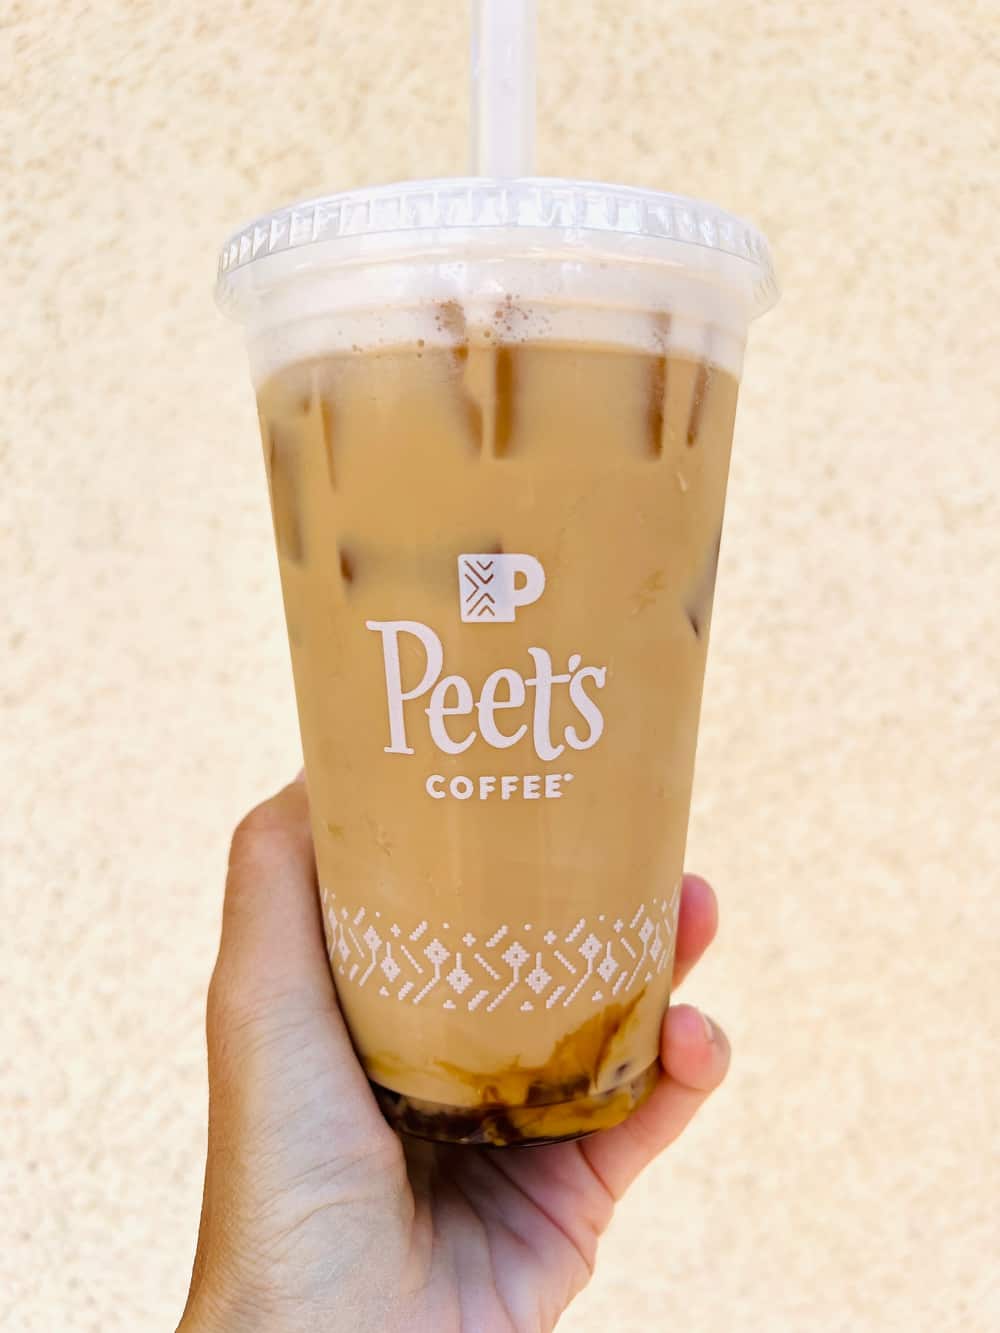 We Tried Peet’s Coffee New Boba-Inspired Brown Sugar Jelly